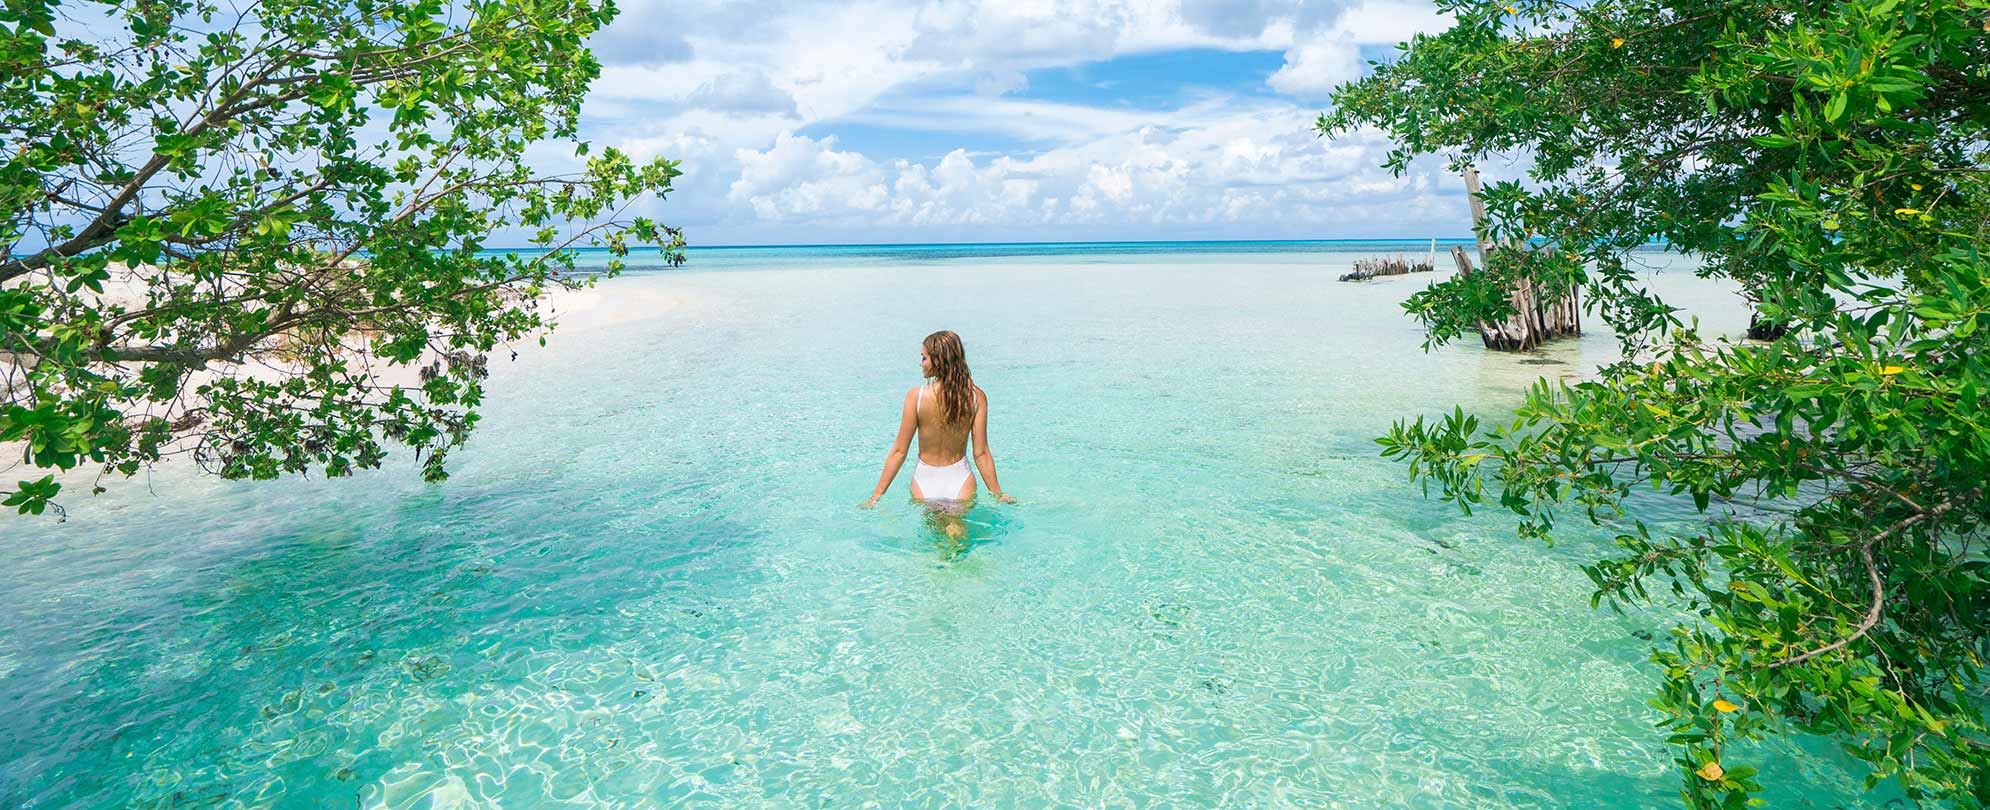 A woman wading in clear, calm water with blue skies in the Western Caribbean.